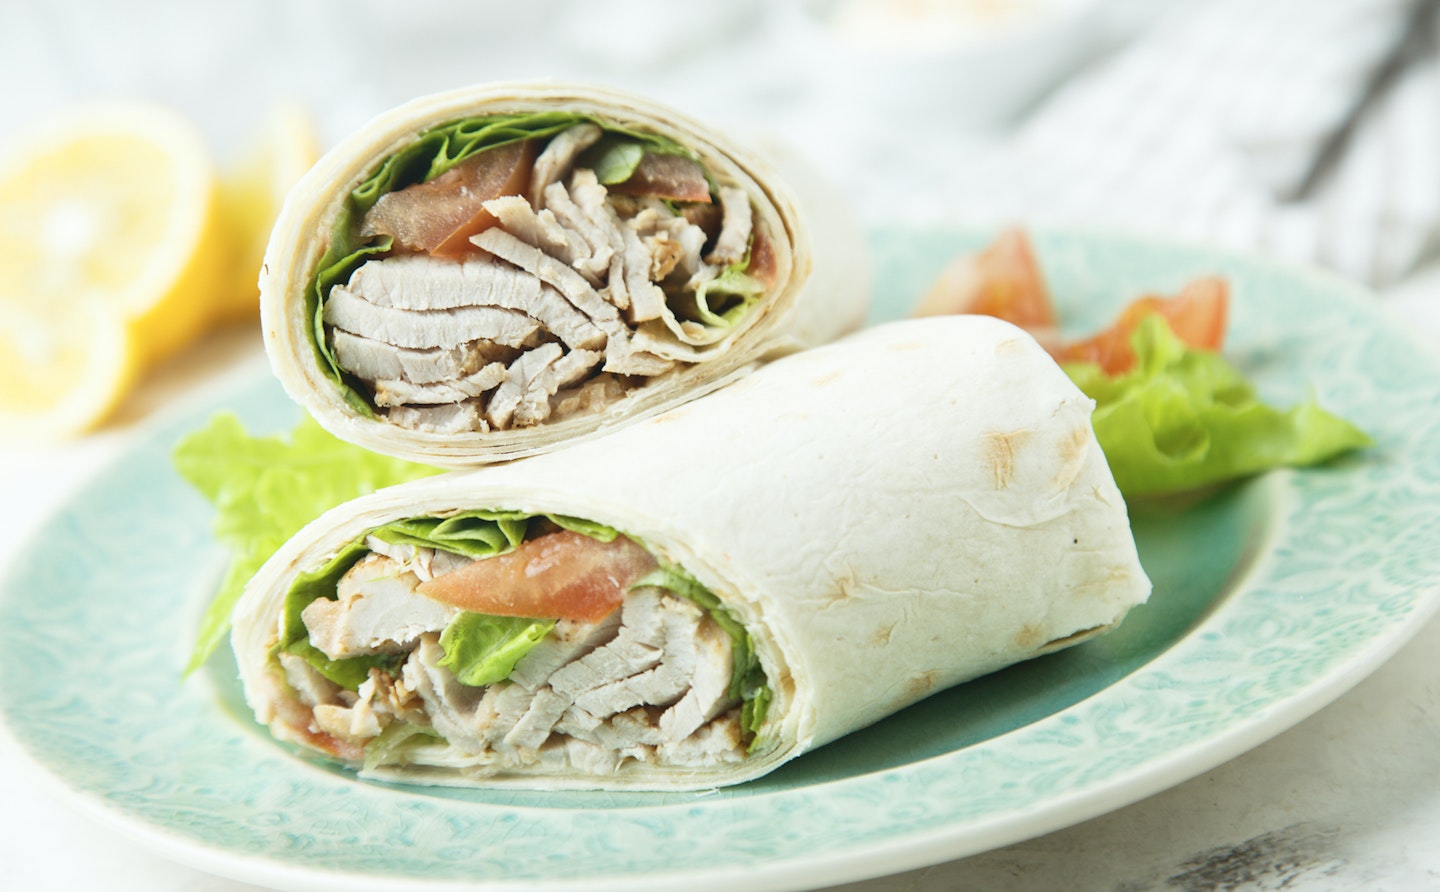 Back to school lunch ideas: Salad wraps